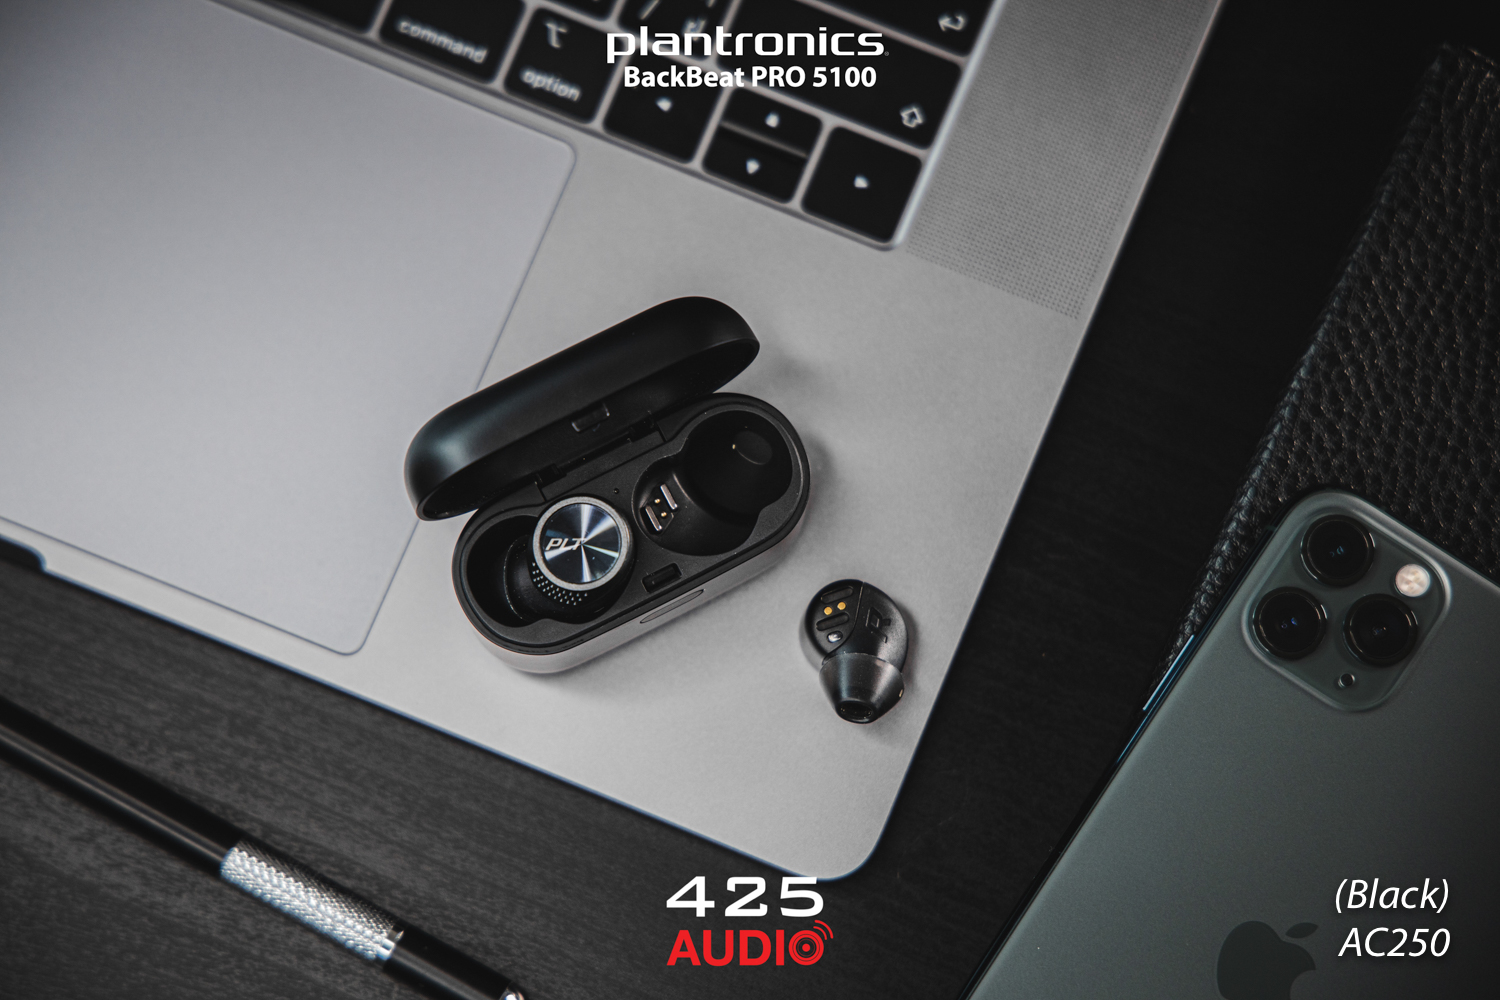 plantronics,plantronicsbackbeat,plantronicsbackbeatpro5100,4mics,windsmart,noisecancelling,goodcall,premiumcall,stereo,stereocall,stereosound,deepbass,IP54,fit,comfort